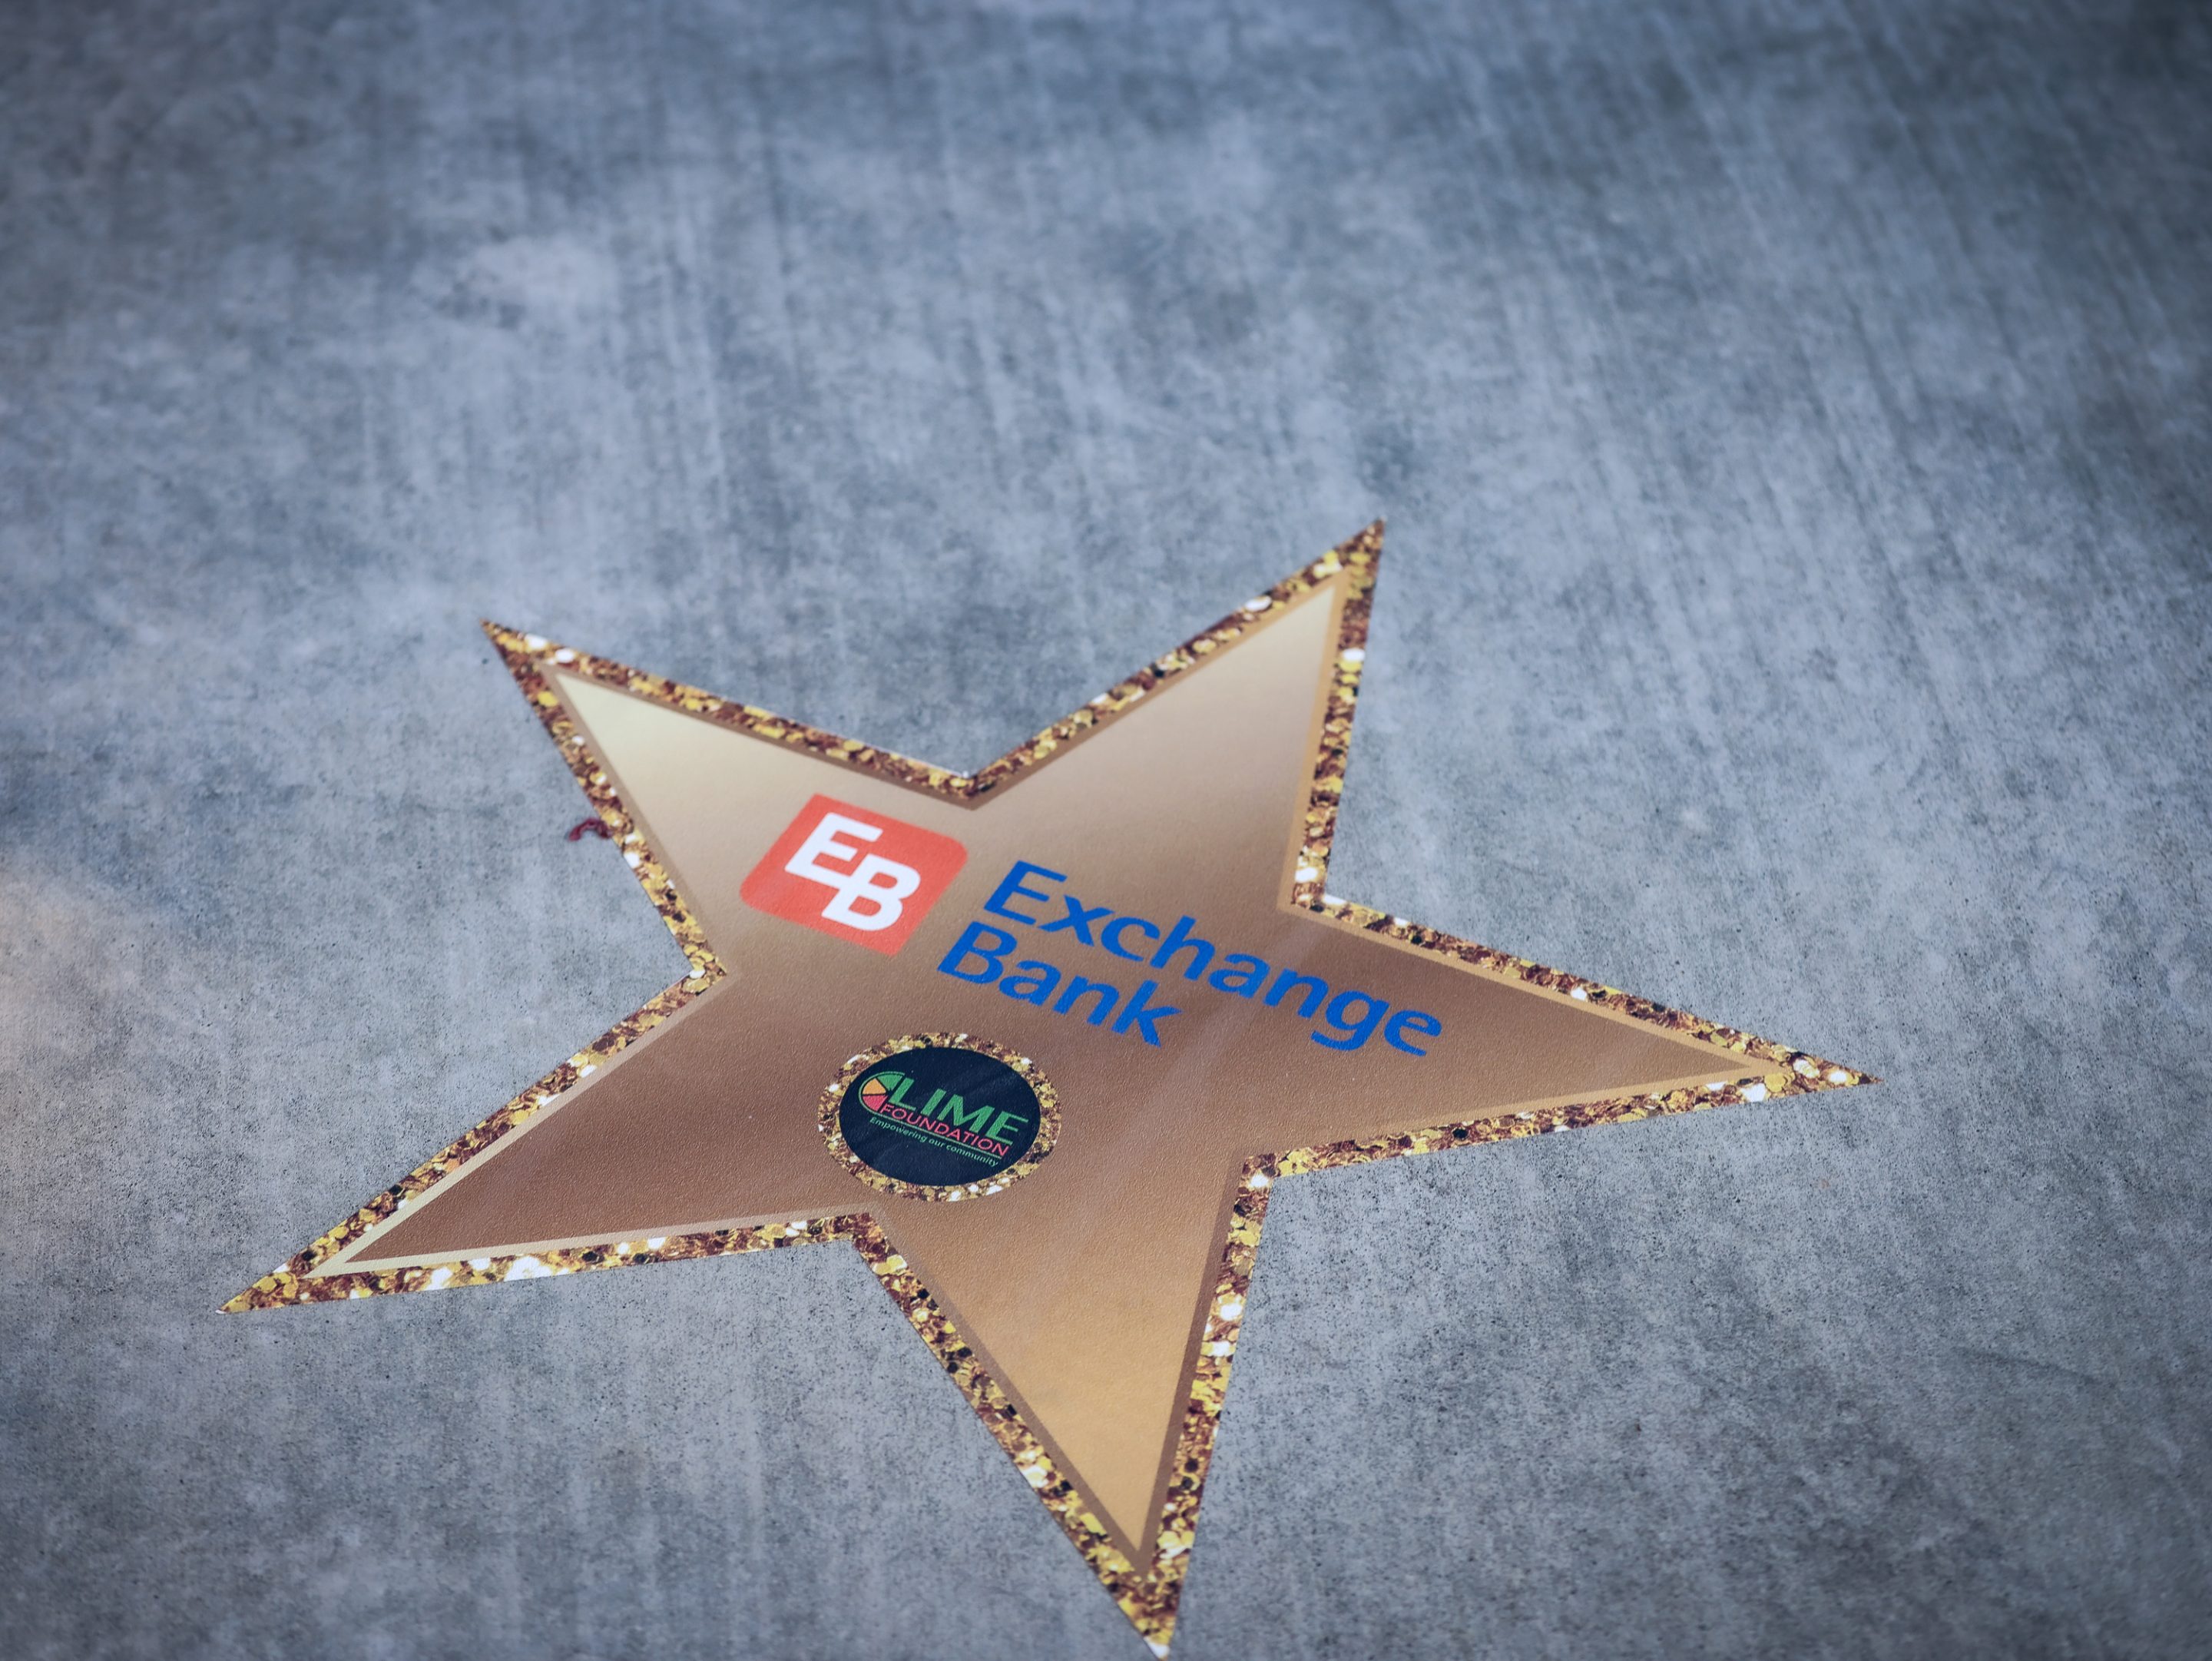 A gold star with the word "Exchange Bank" on it is a symbol of recognition.